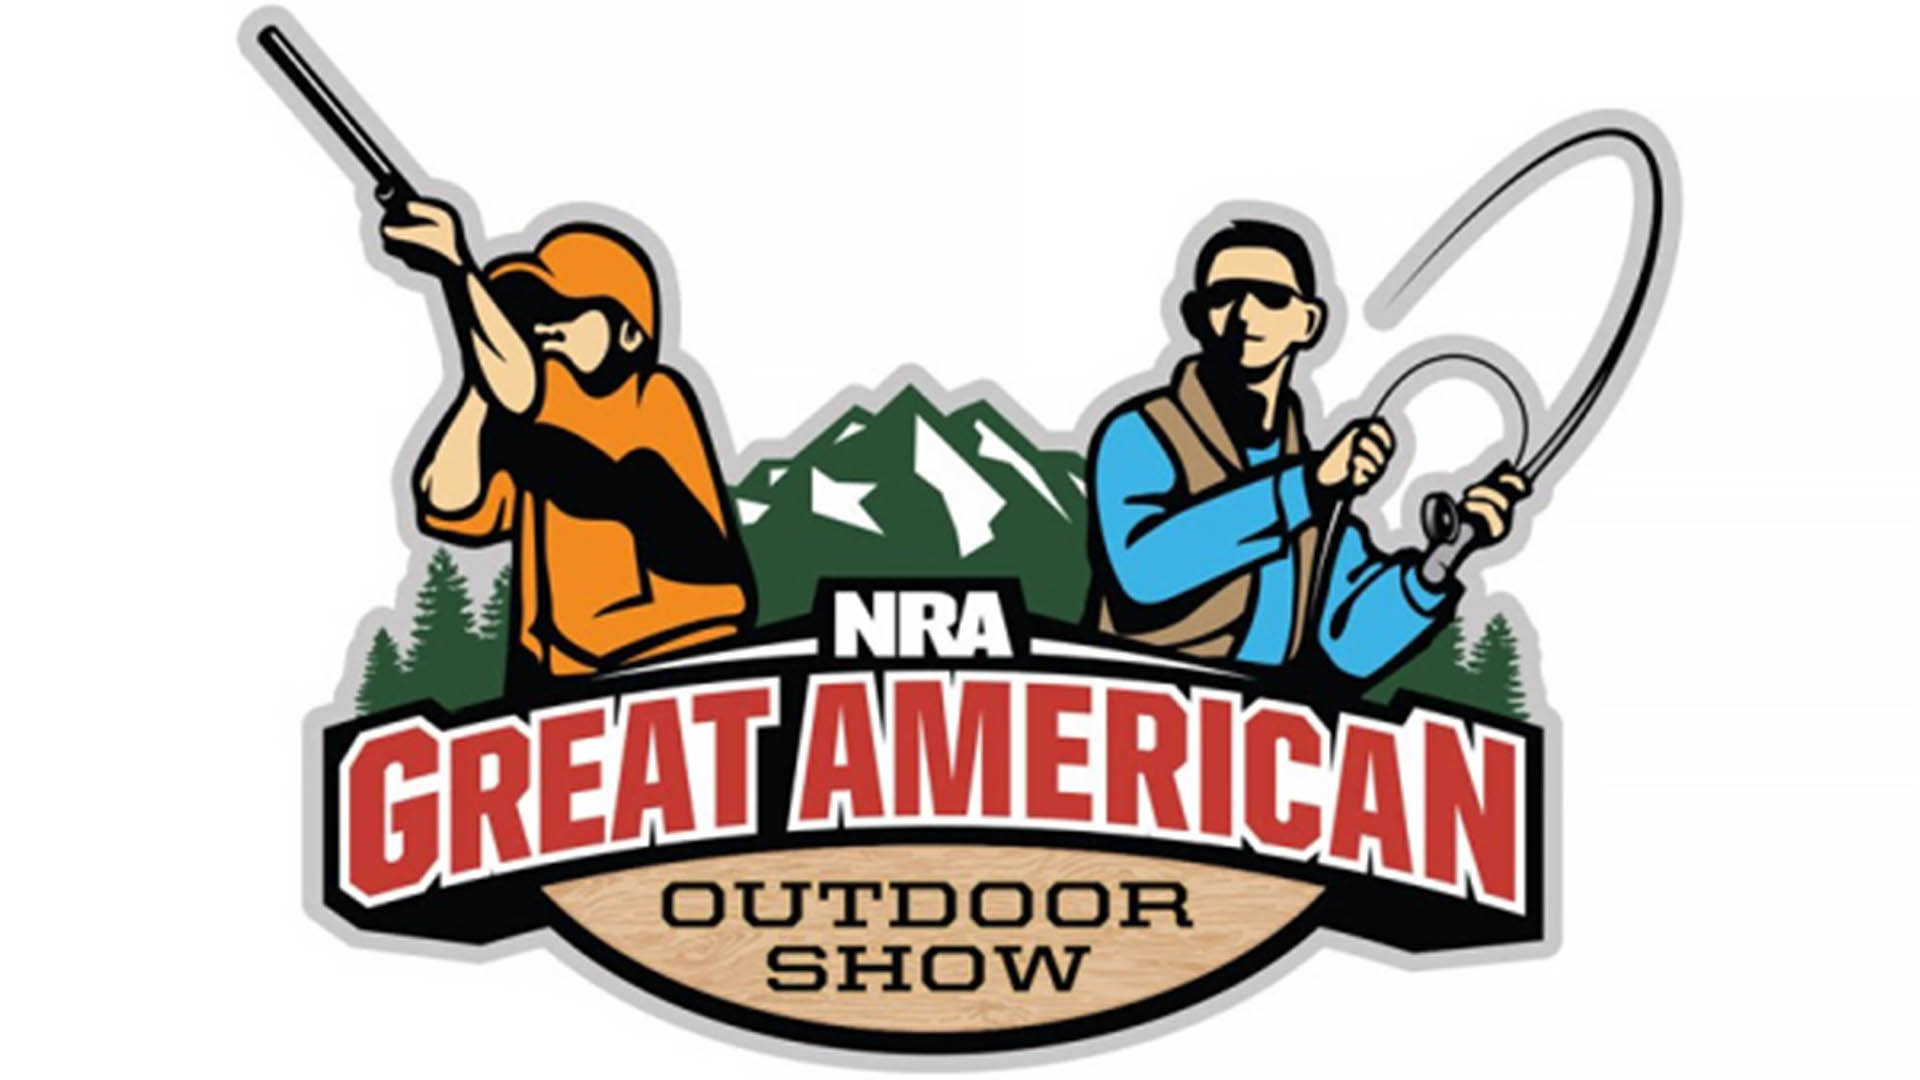 200,000 Attend NRA’s Great American Outdoor Show An Official Journal